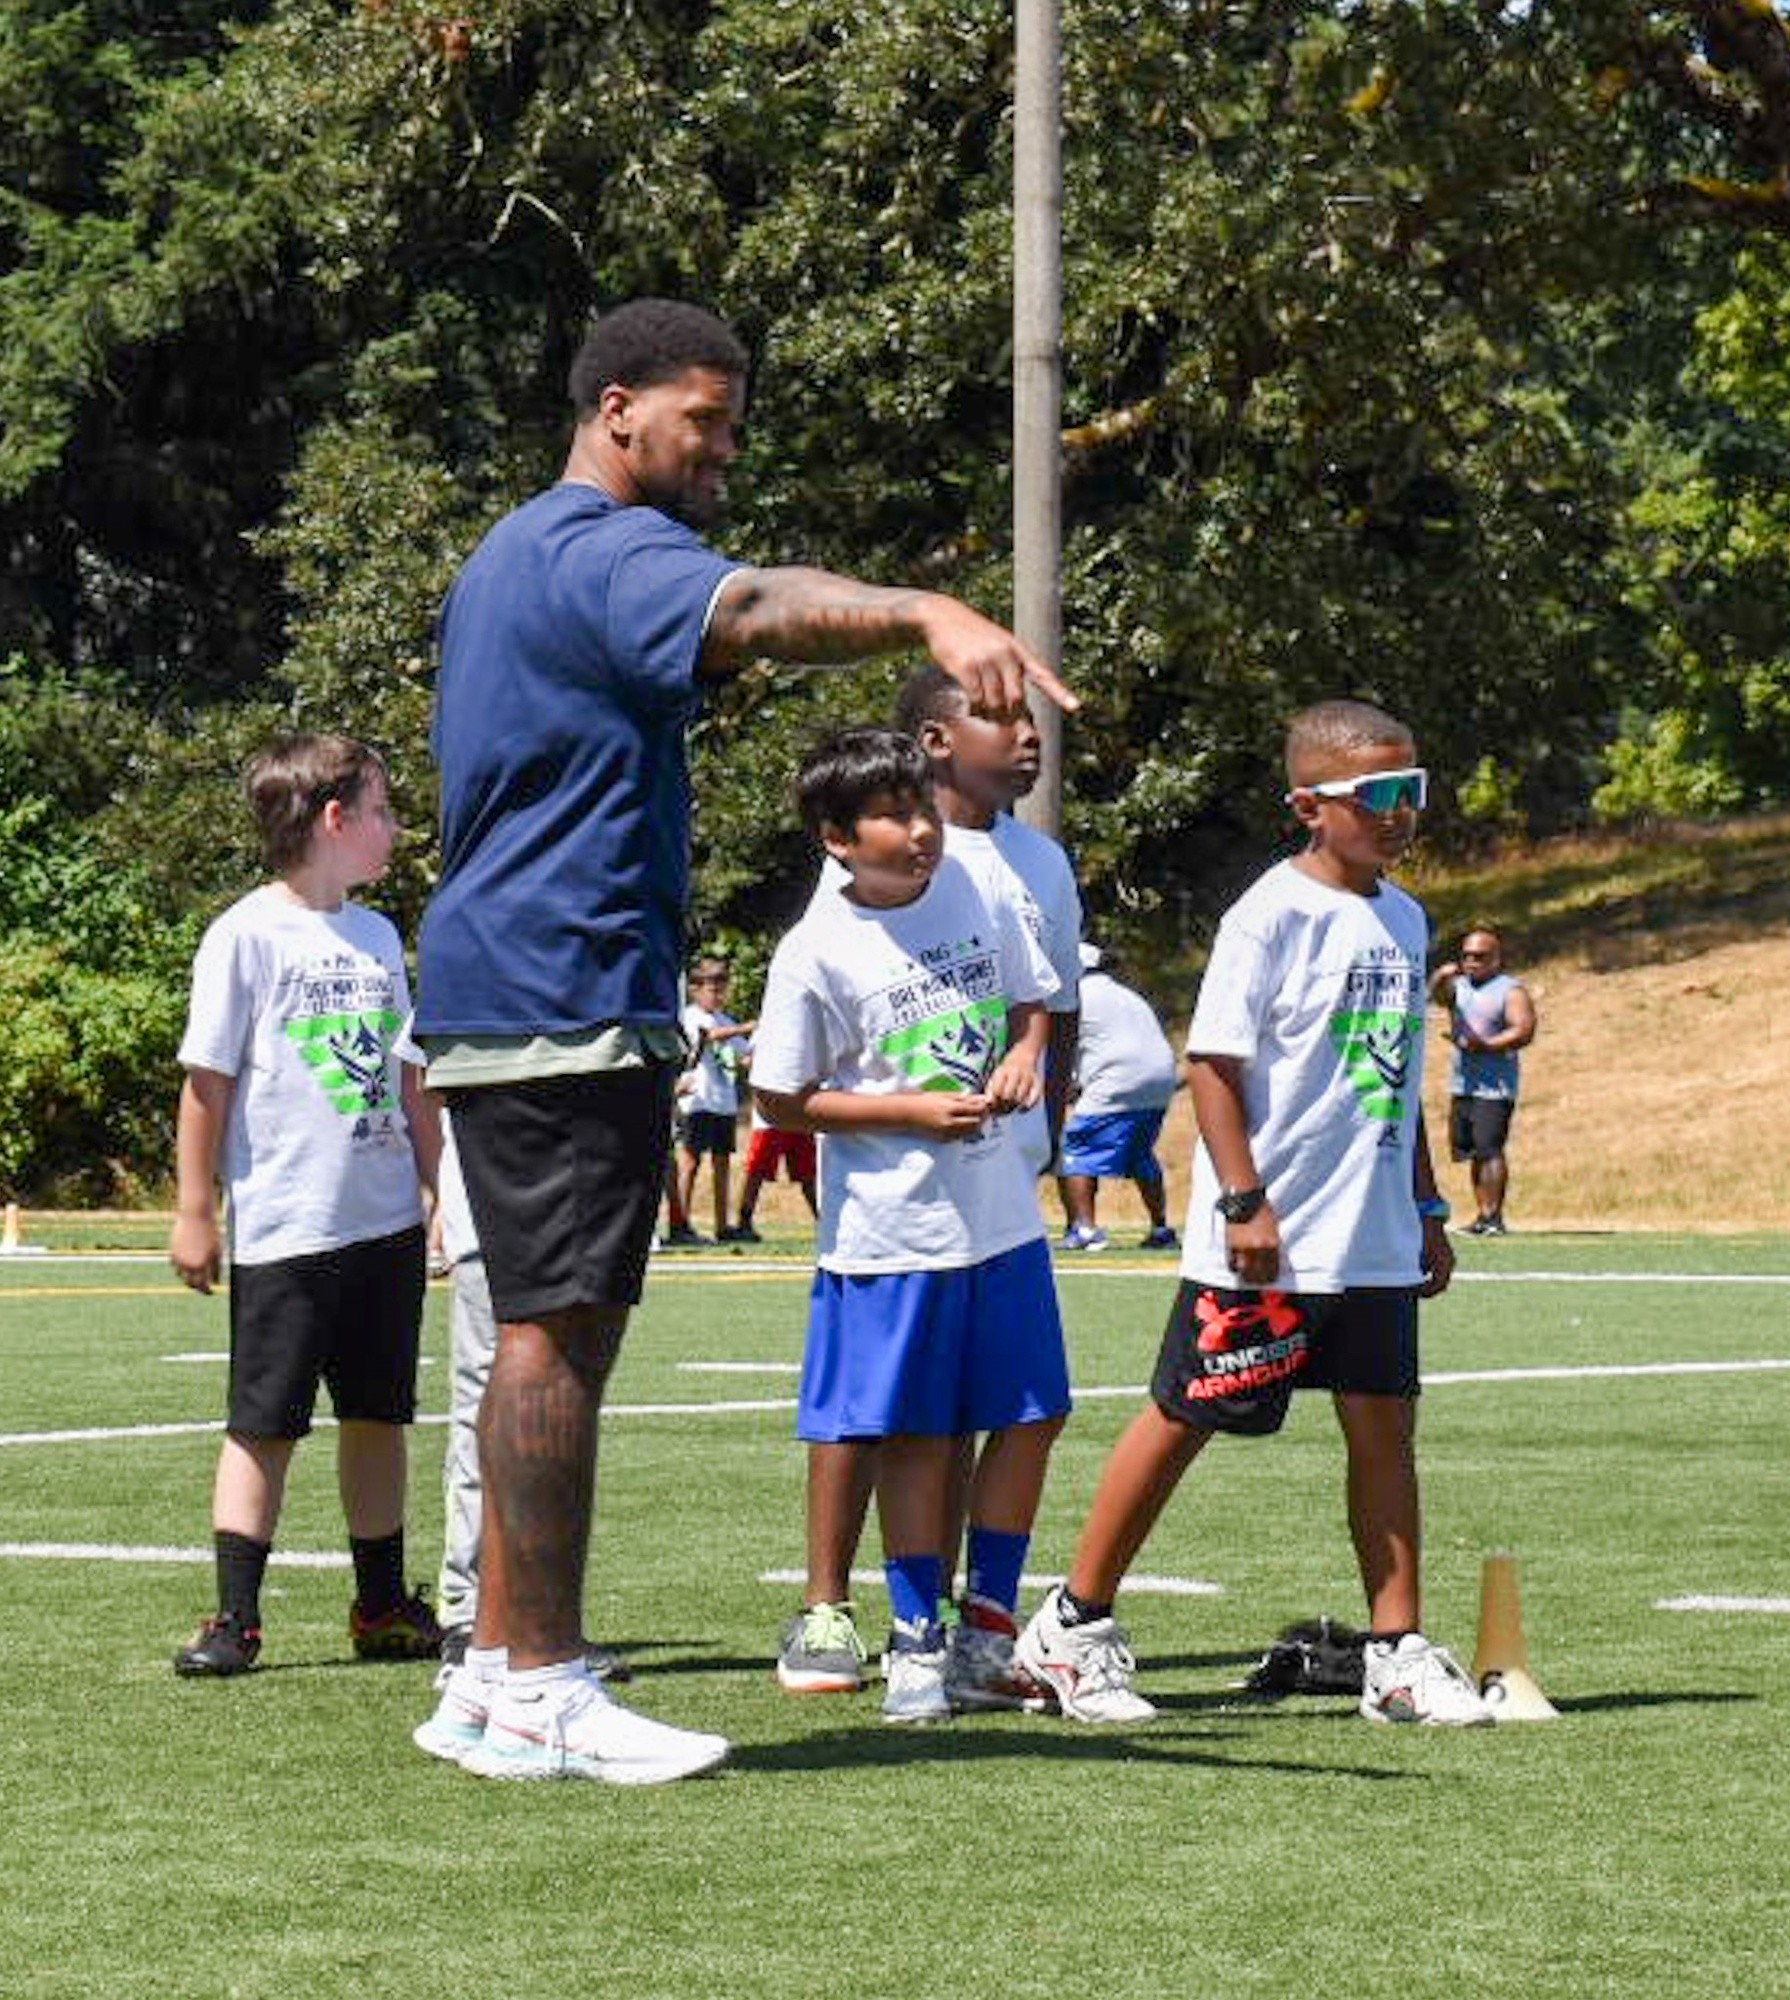 Seahawks player aims to inspire JBLM youth, Article